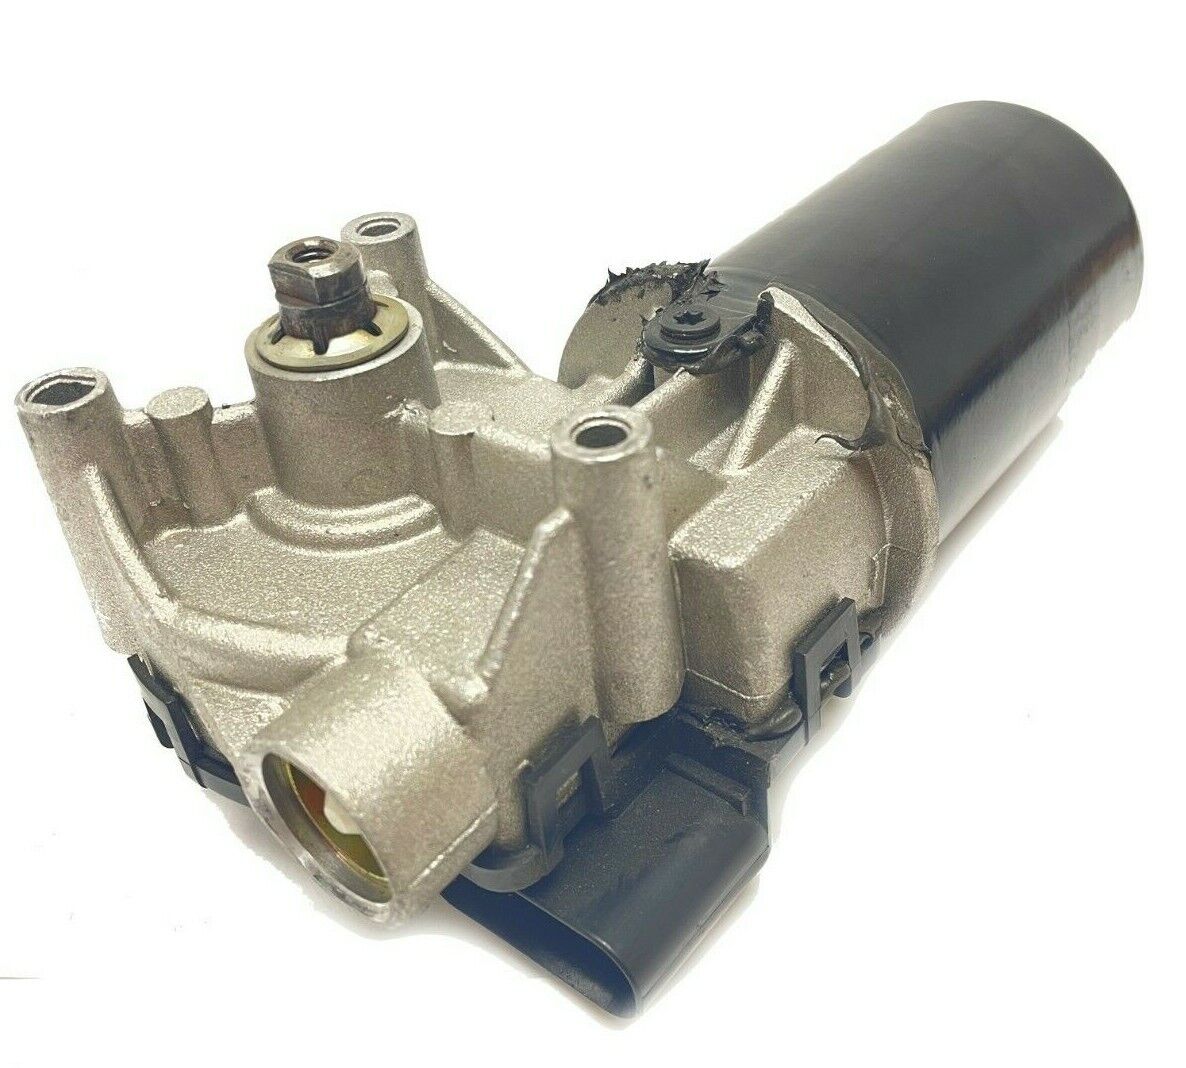 OEM Ford Windshield Wiper Motor For 2000-2007 Ford Focus XS41-17508-CA